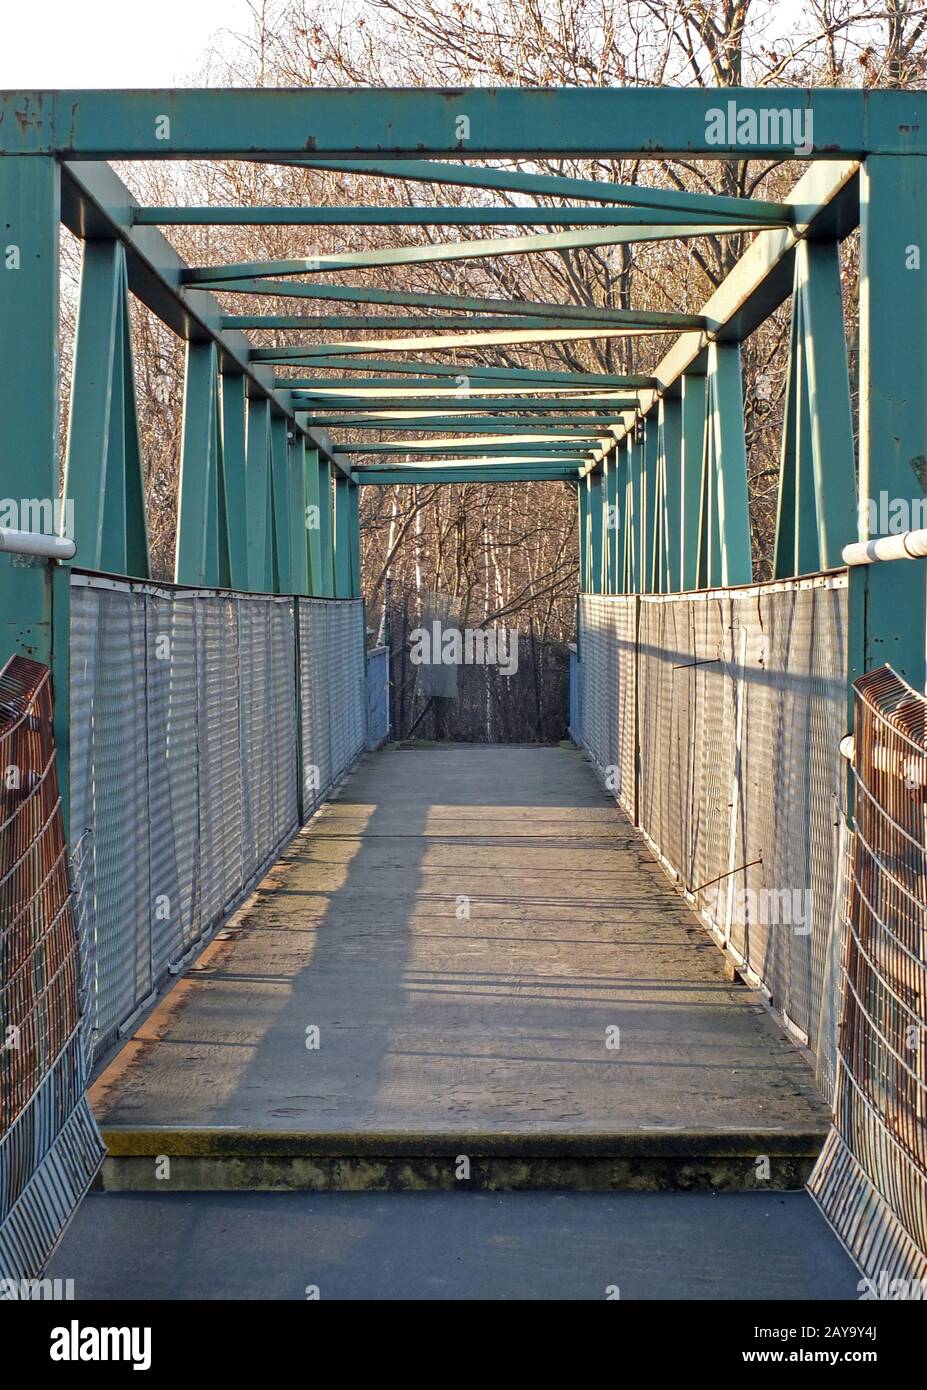 a perspective view along an green rusting metal pedestrian footbridge with rails and girders Stock Photo